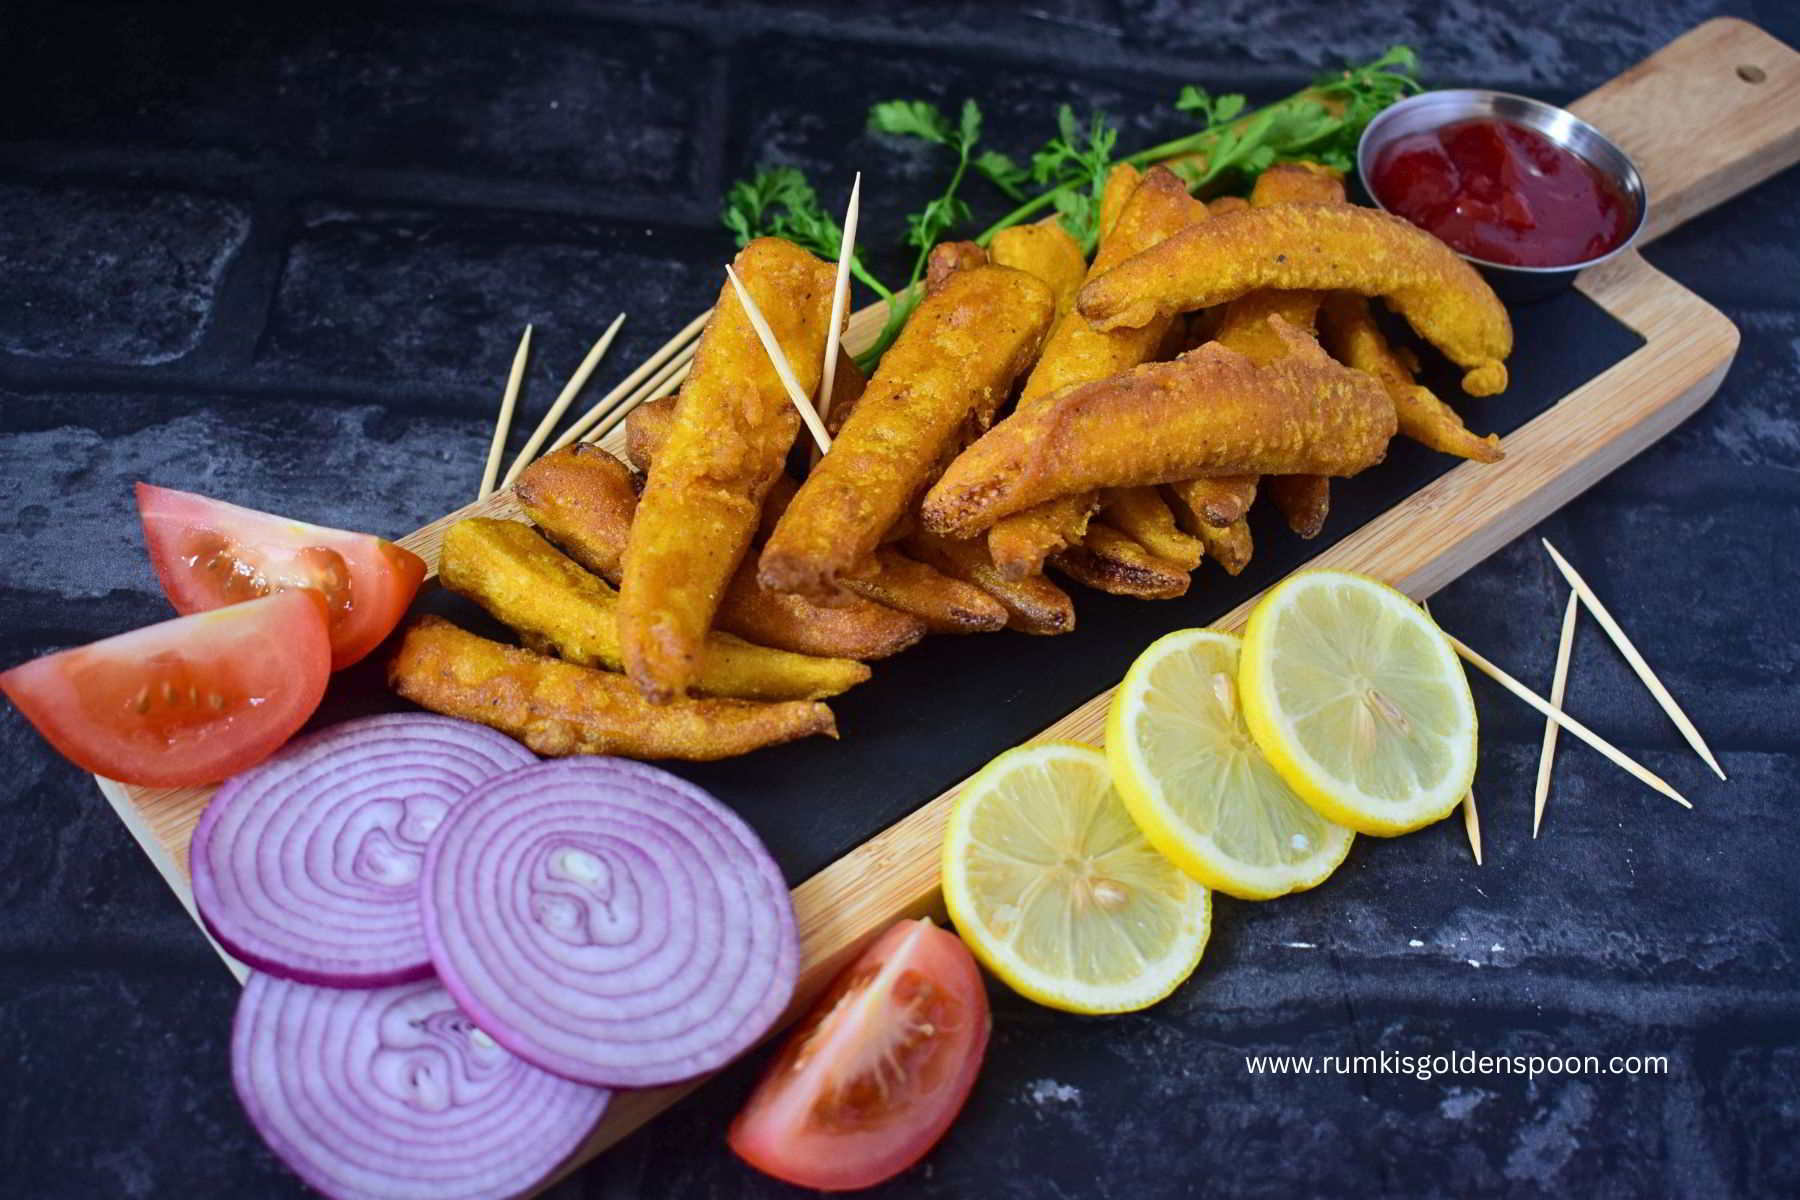 crispy baby corn fritters, how to make baby corn fingers, baby corn finger fry, babycorn fingers, crispy babycorn fingers, babycorn fritters, Rumki's Golden Spoon